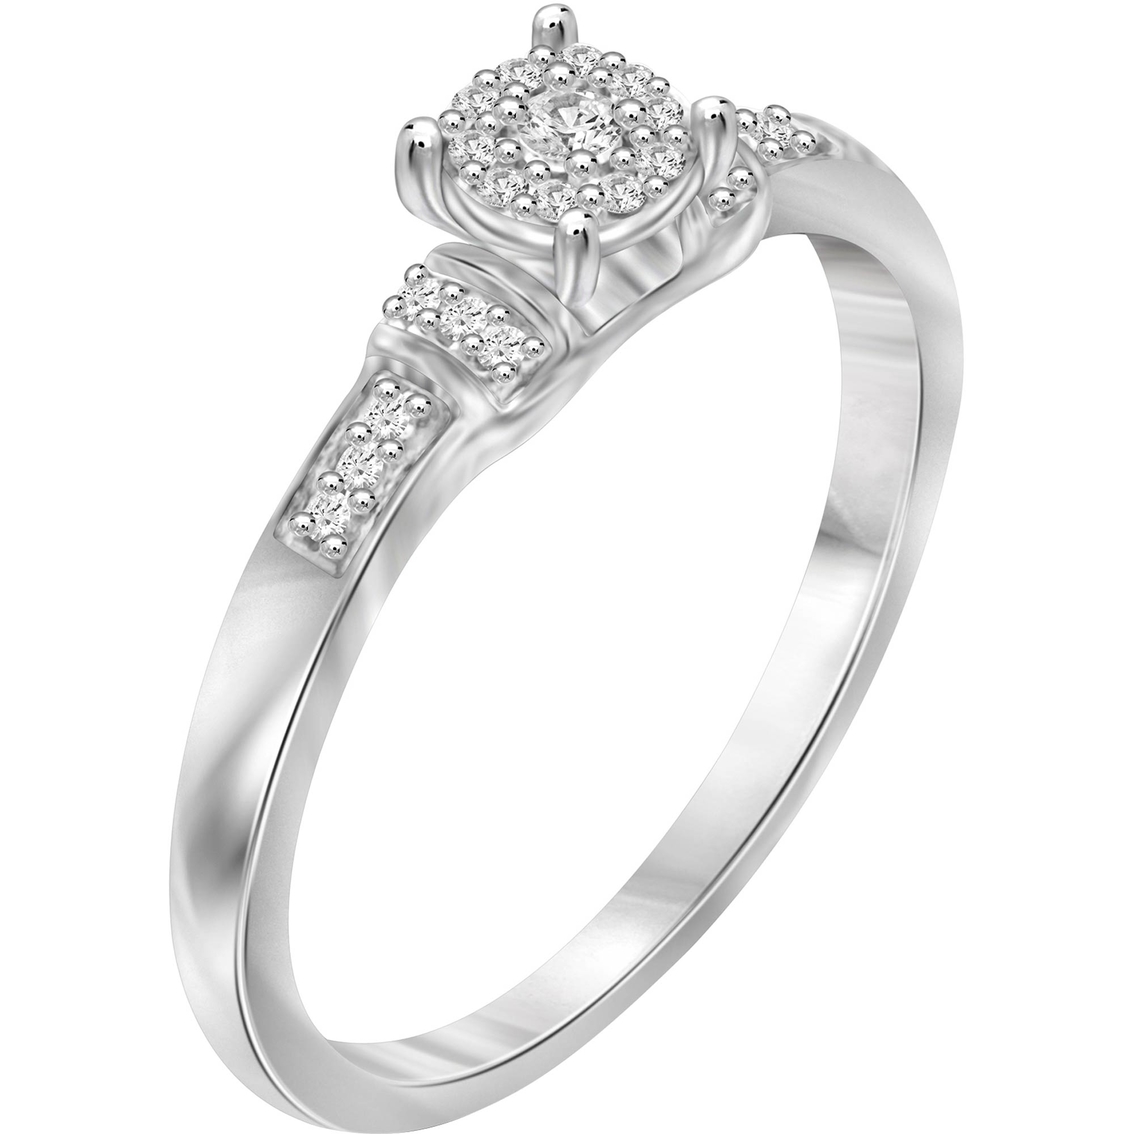 She Shines Sterling Silver 1/10 CTW Genuine White Diamond Promise Fashion Ring - Image 2 of 4